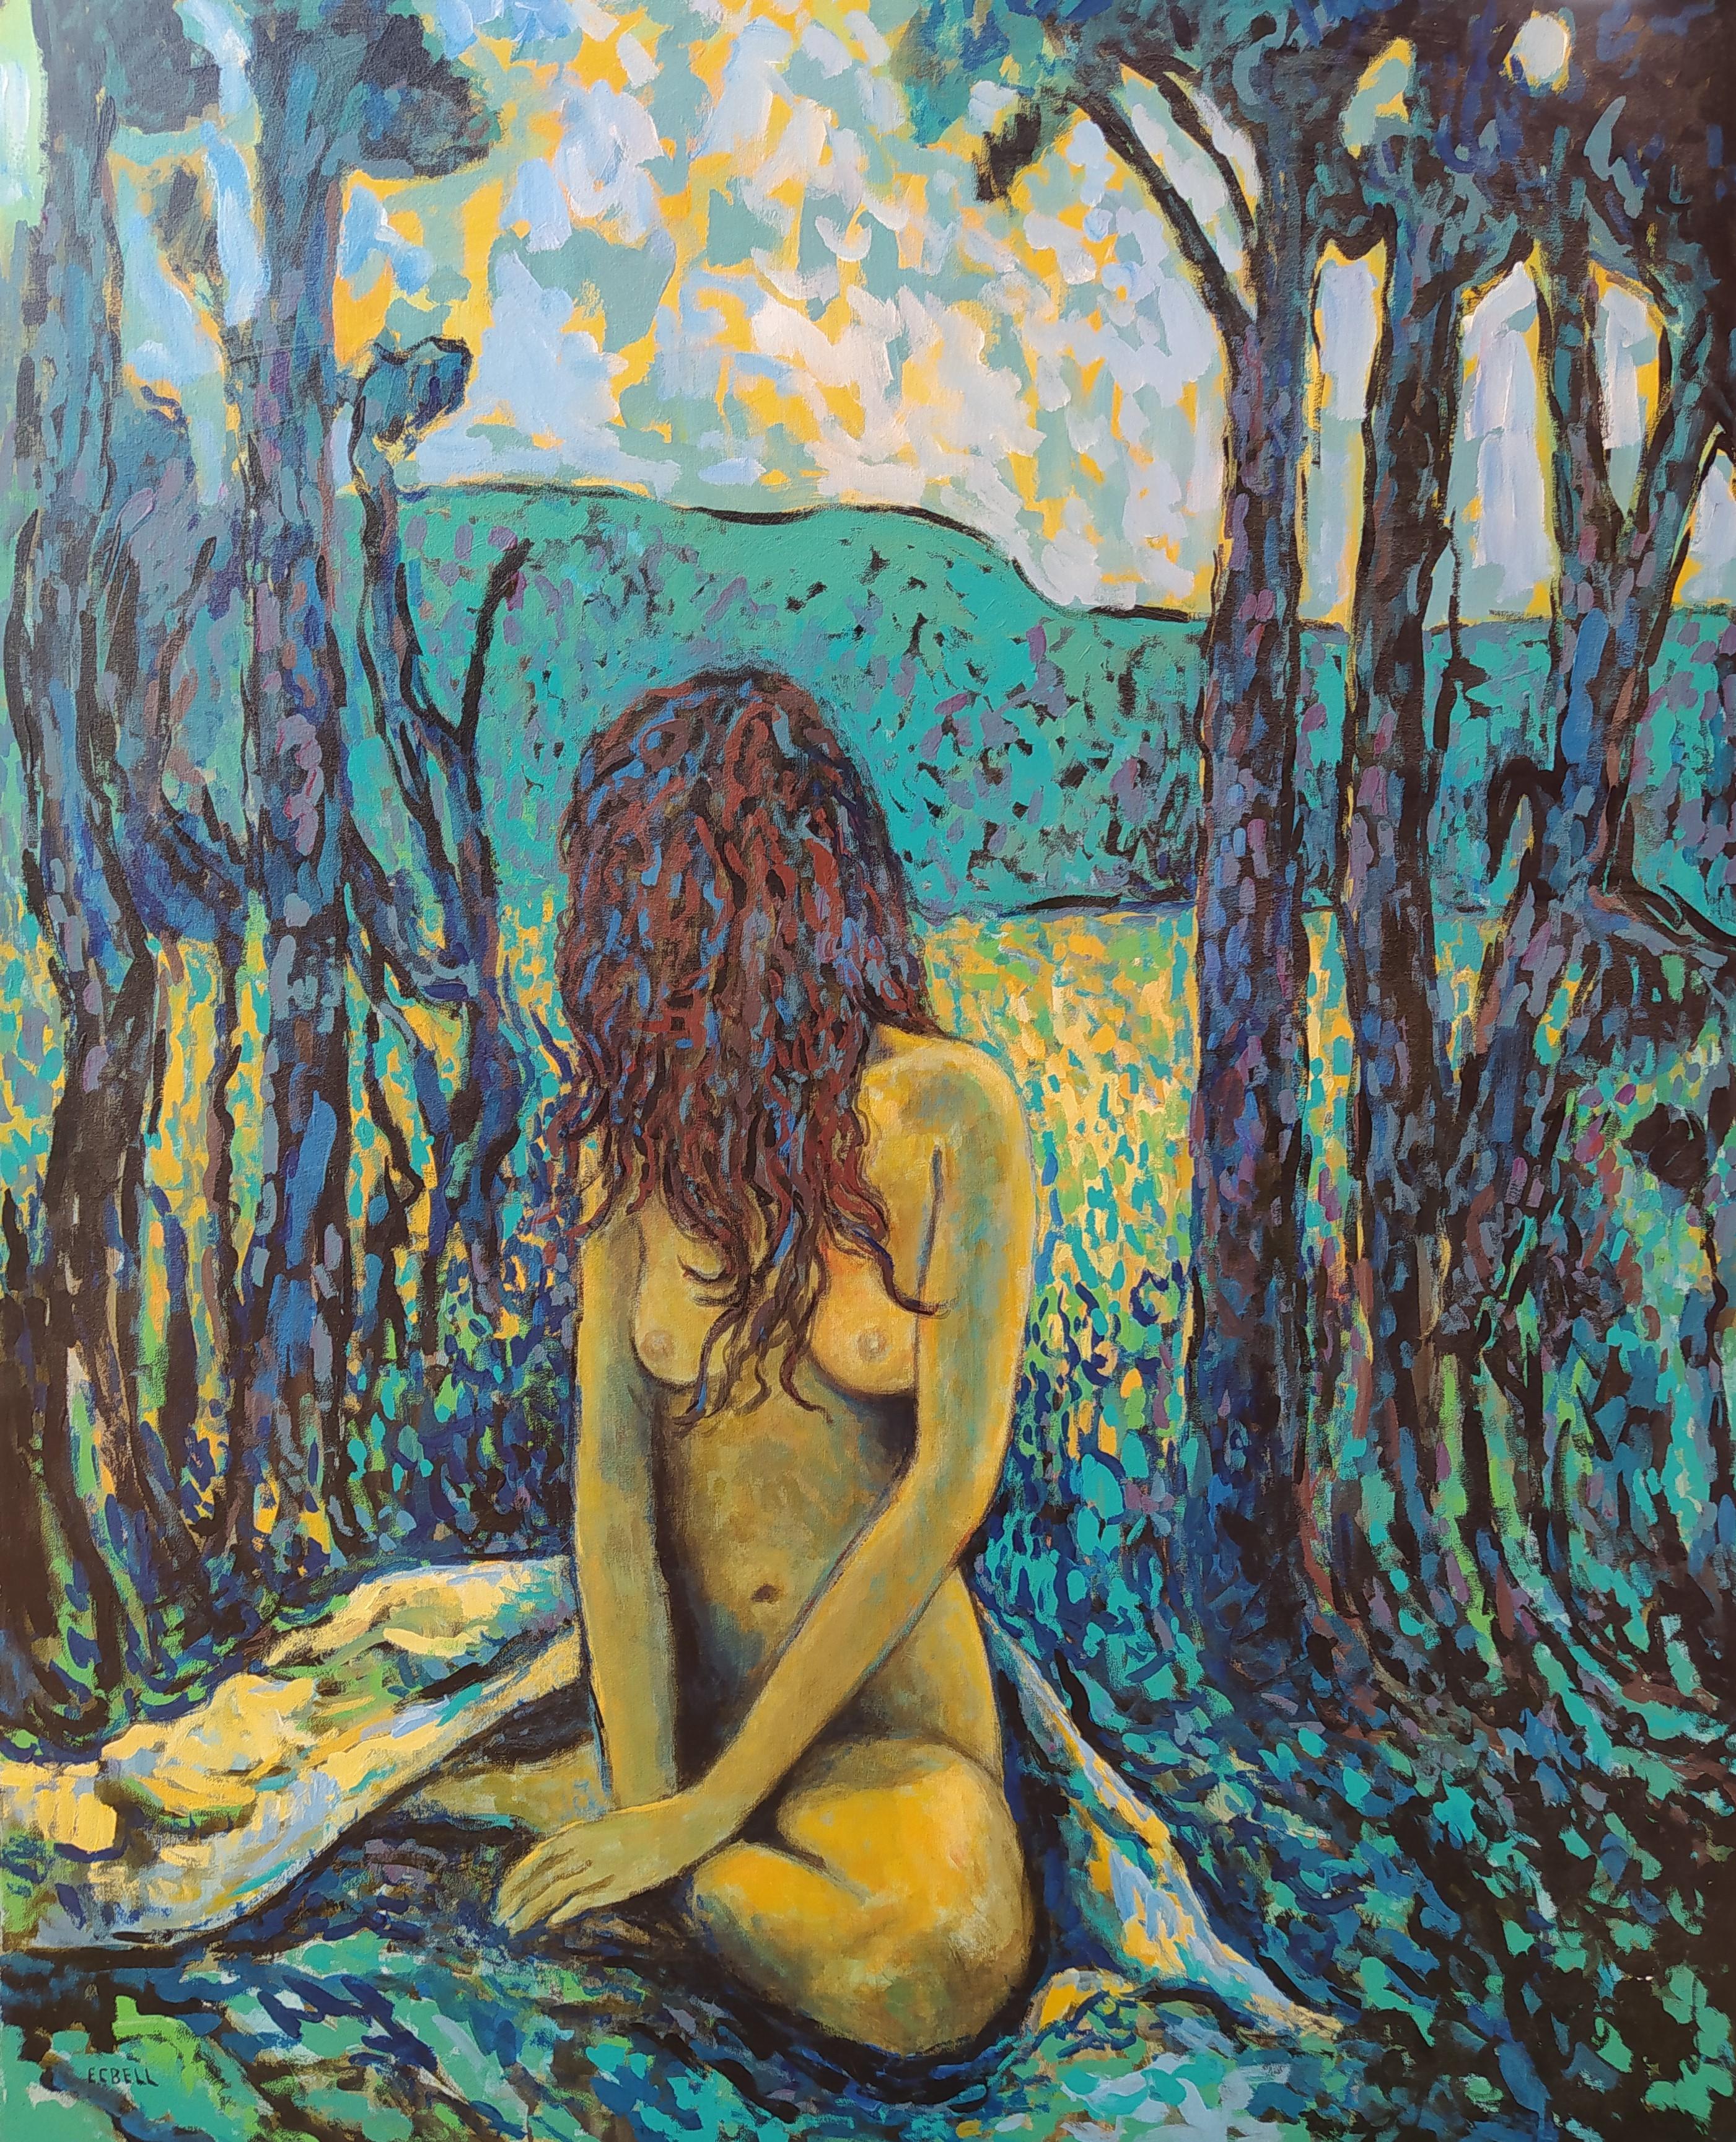 "Rhonda" - Vertical expressionist turquoise landscape with female nude.